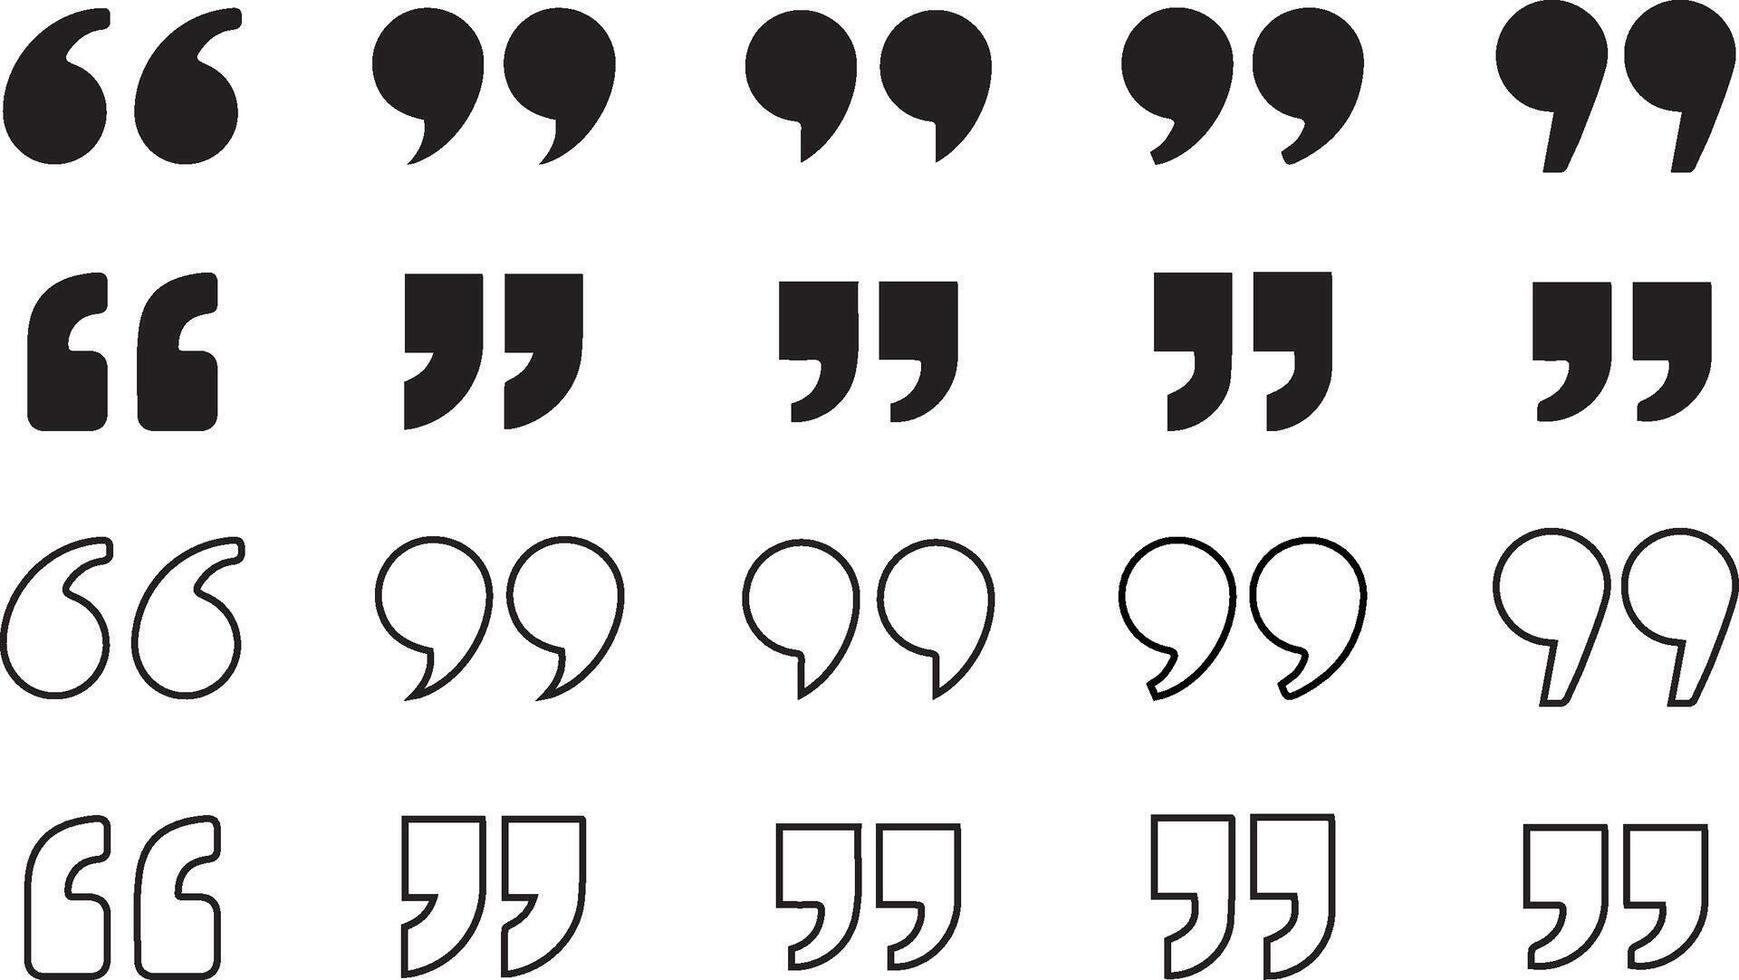 Quotes, quotation marks black isolated icon set. vector